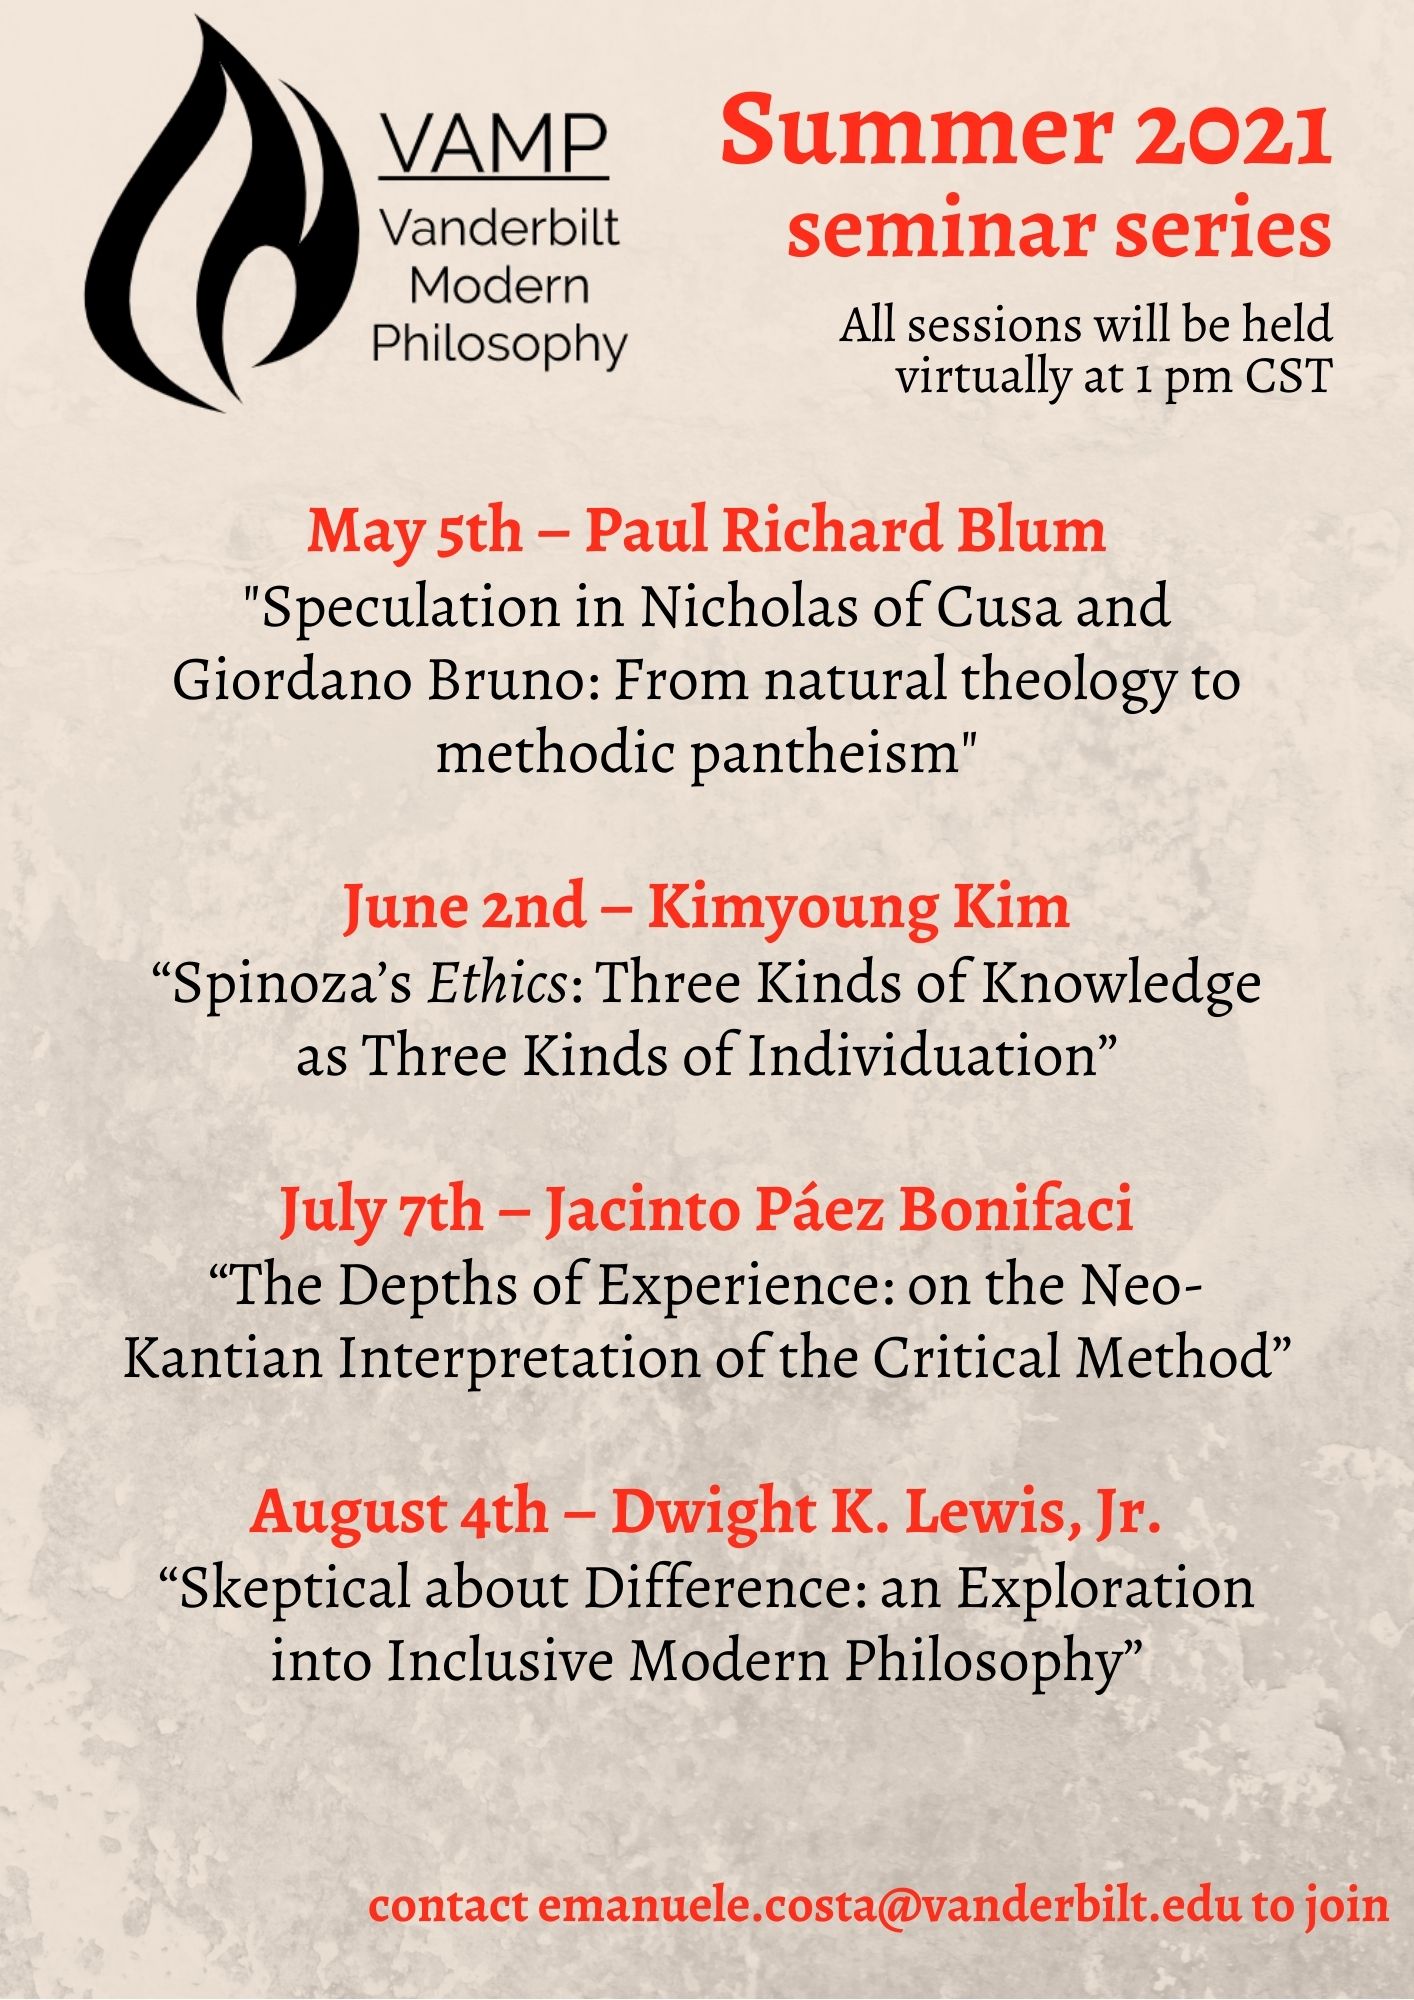 May 5th – Paul Richard Blum "Speculation in Nicholas of Cusa and Giordano Bruno: From Natural Theology to Methodic Pantheism"  June 2nd – Kimyoung Kim “Spinoza’s Ethics: Three Kinds of Knowledge as Three Kinds of Individuation”  July 7th – Jacinto Páez Bonifaci “The Depths of Experience: on the Neo-Kantian Interpretation of the Critical Method”  August 4th – Dwight K. Lewis, Jr. “Skeptical about Difference: an Exploration into Inclusive Modern Philosophy”